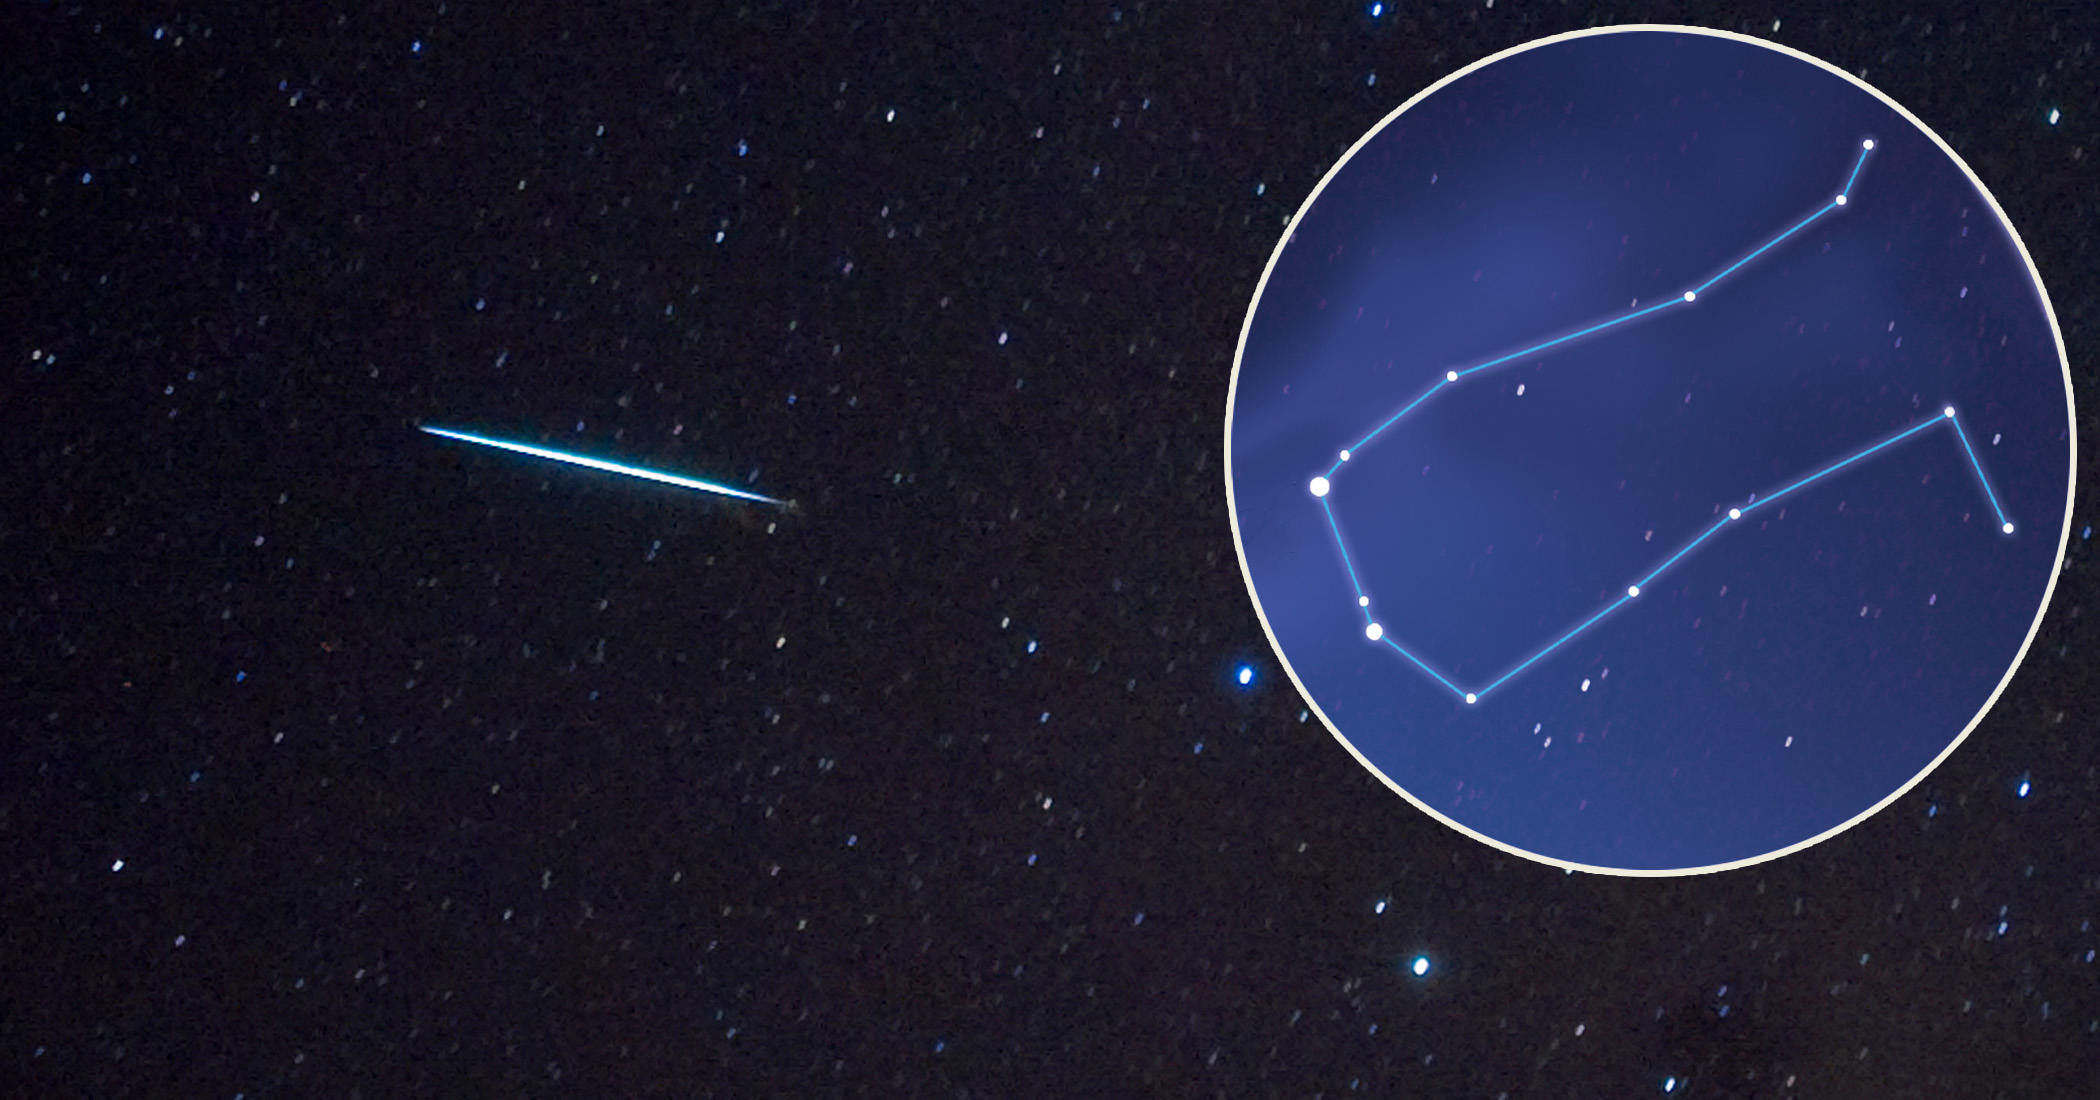 Geminids Meteor Shower to Peak MidDecember—Perfect Time to Wish Upon a